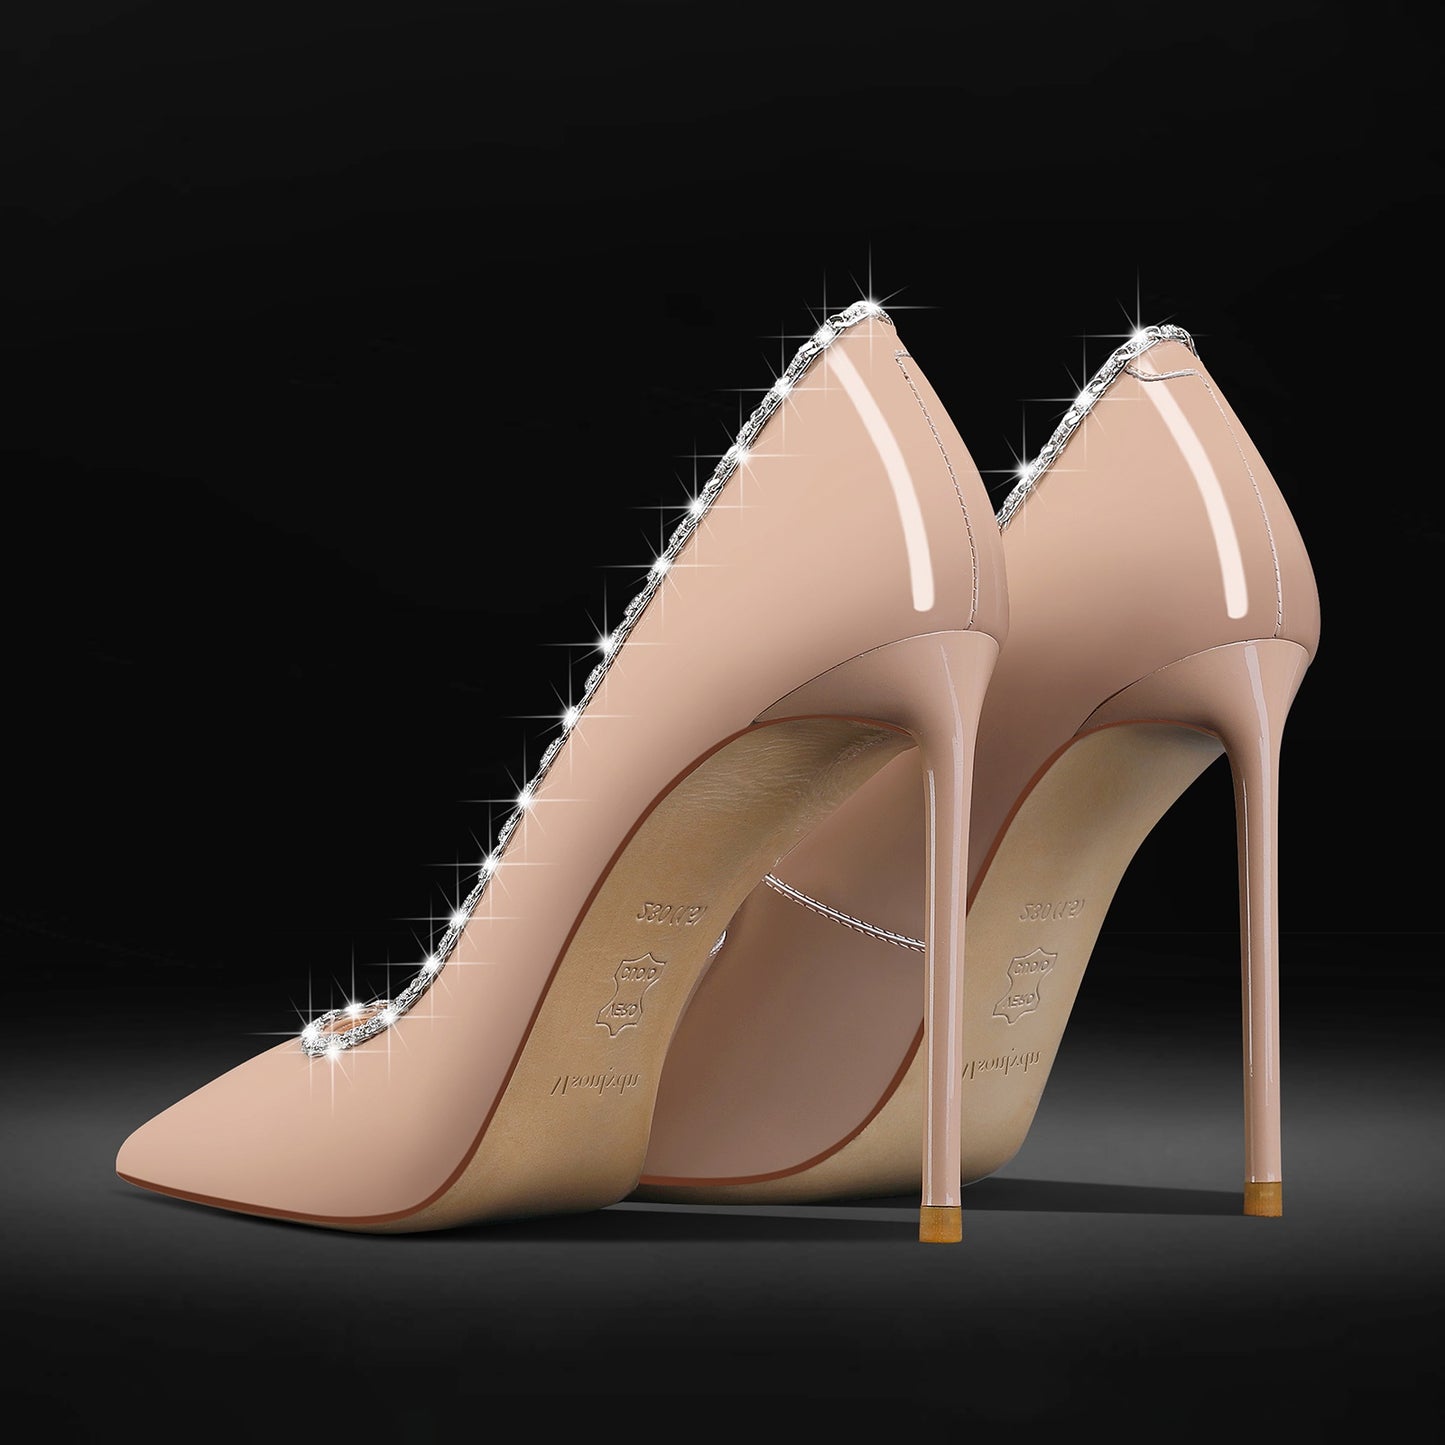 Women's Sexy Suede Stiletto Pumps for Wedding, Bridal Shoes with Comfortable High Heels